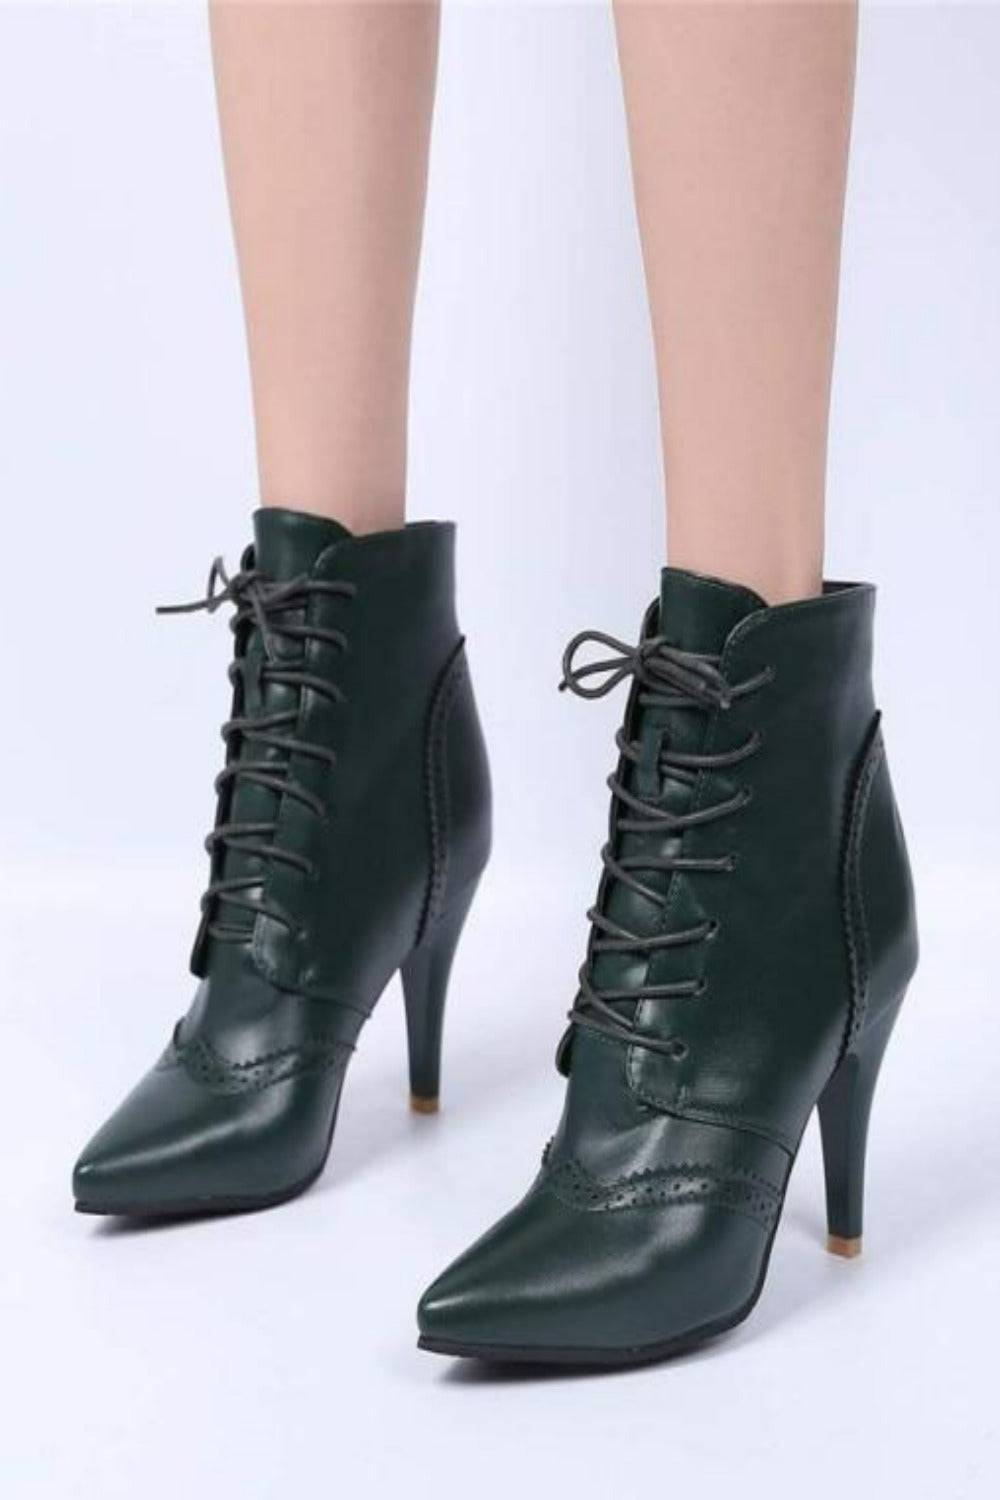 Vintage Winter Women Lace Up Lady Short Martin Boot - TGC Boutique - Ankle Booties